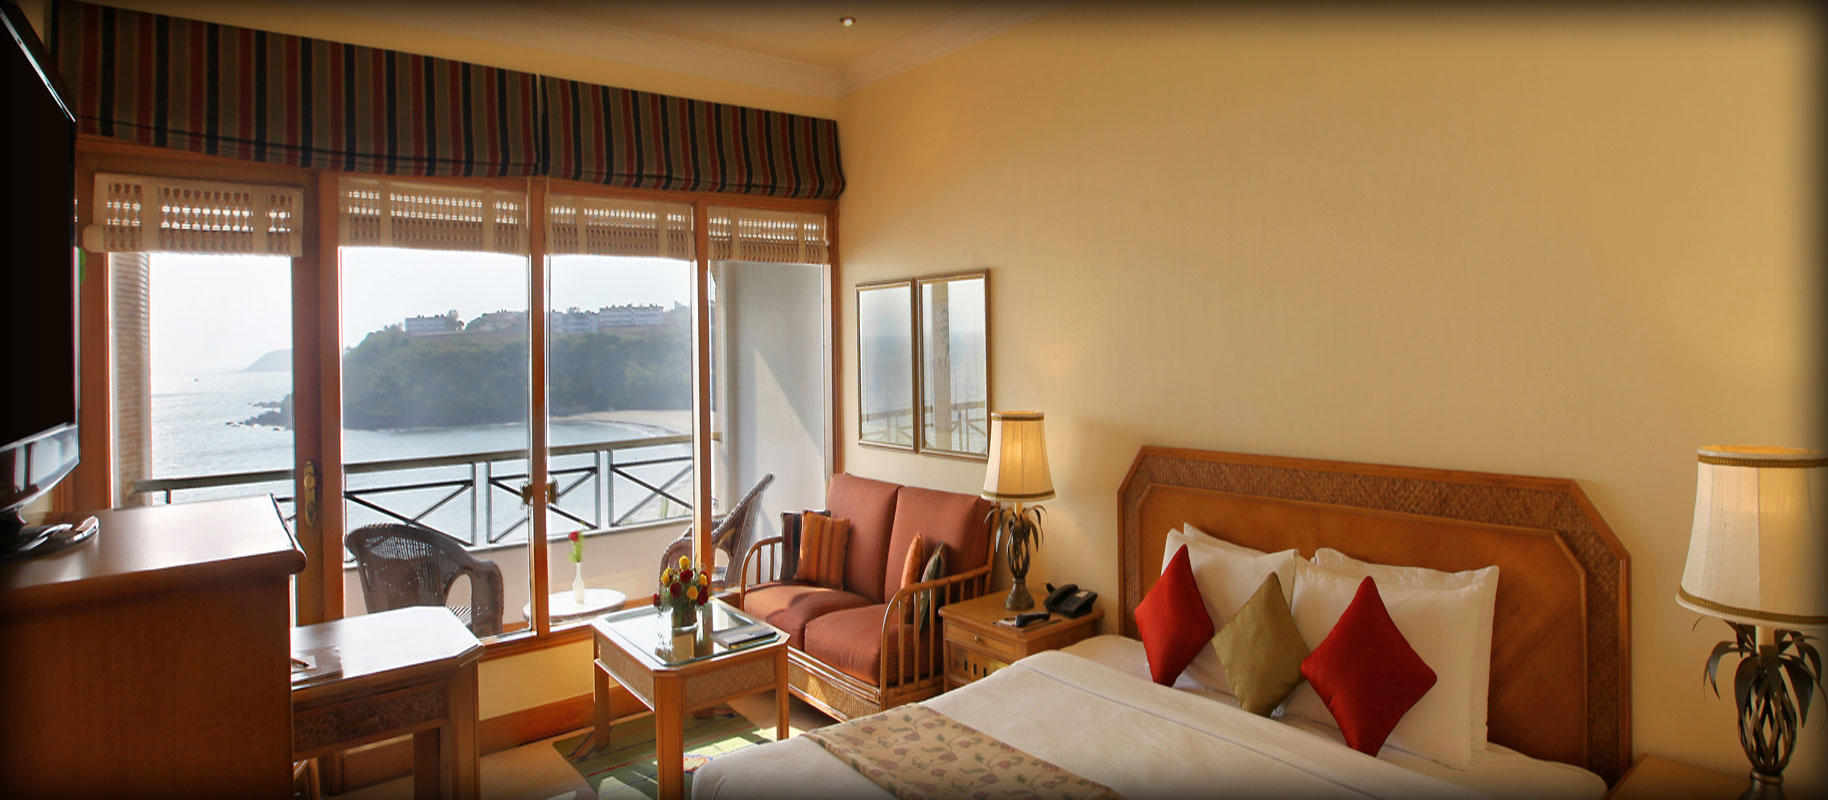 Plan your holidays in Goa with best hotel stay